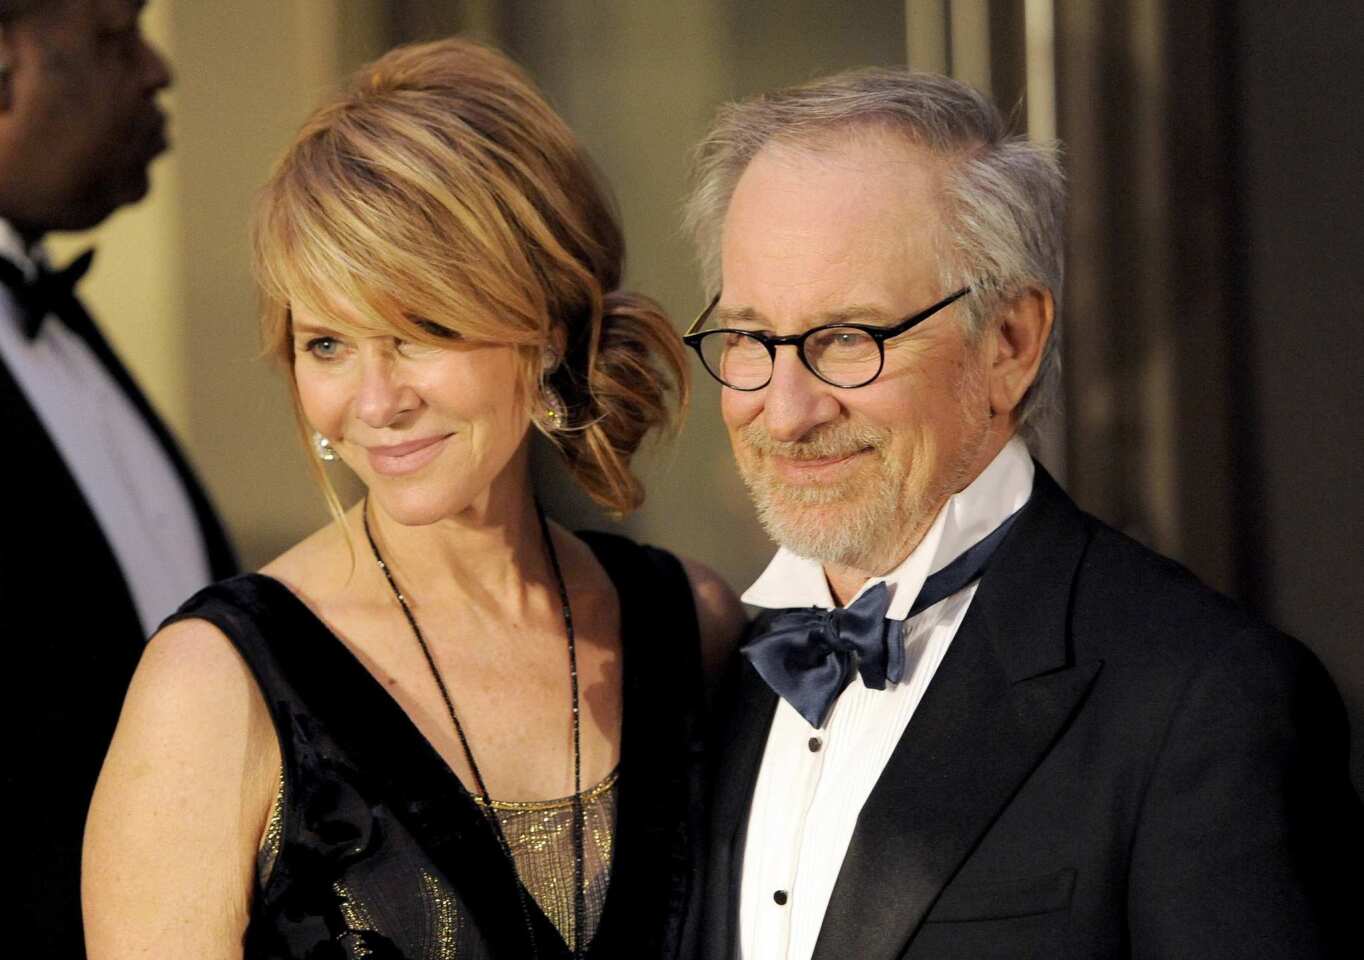 The director, with his wife, saw his film "War Horse" nominated for best picture.